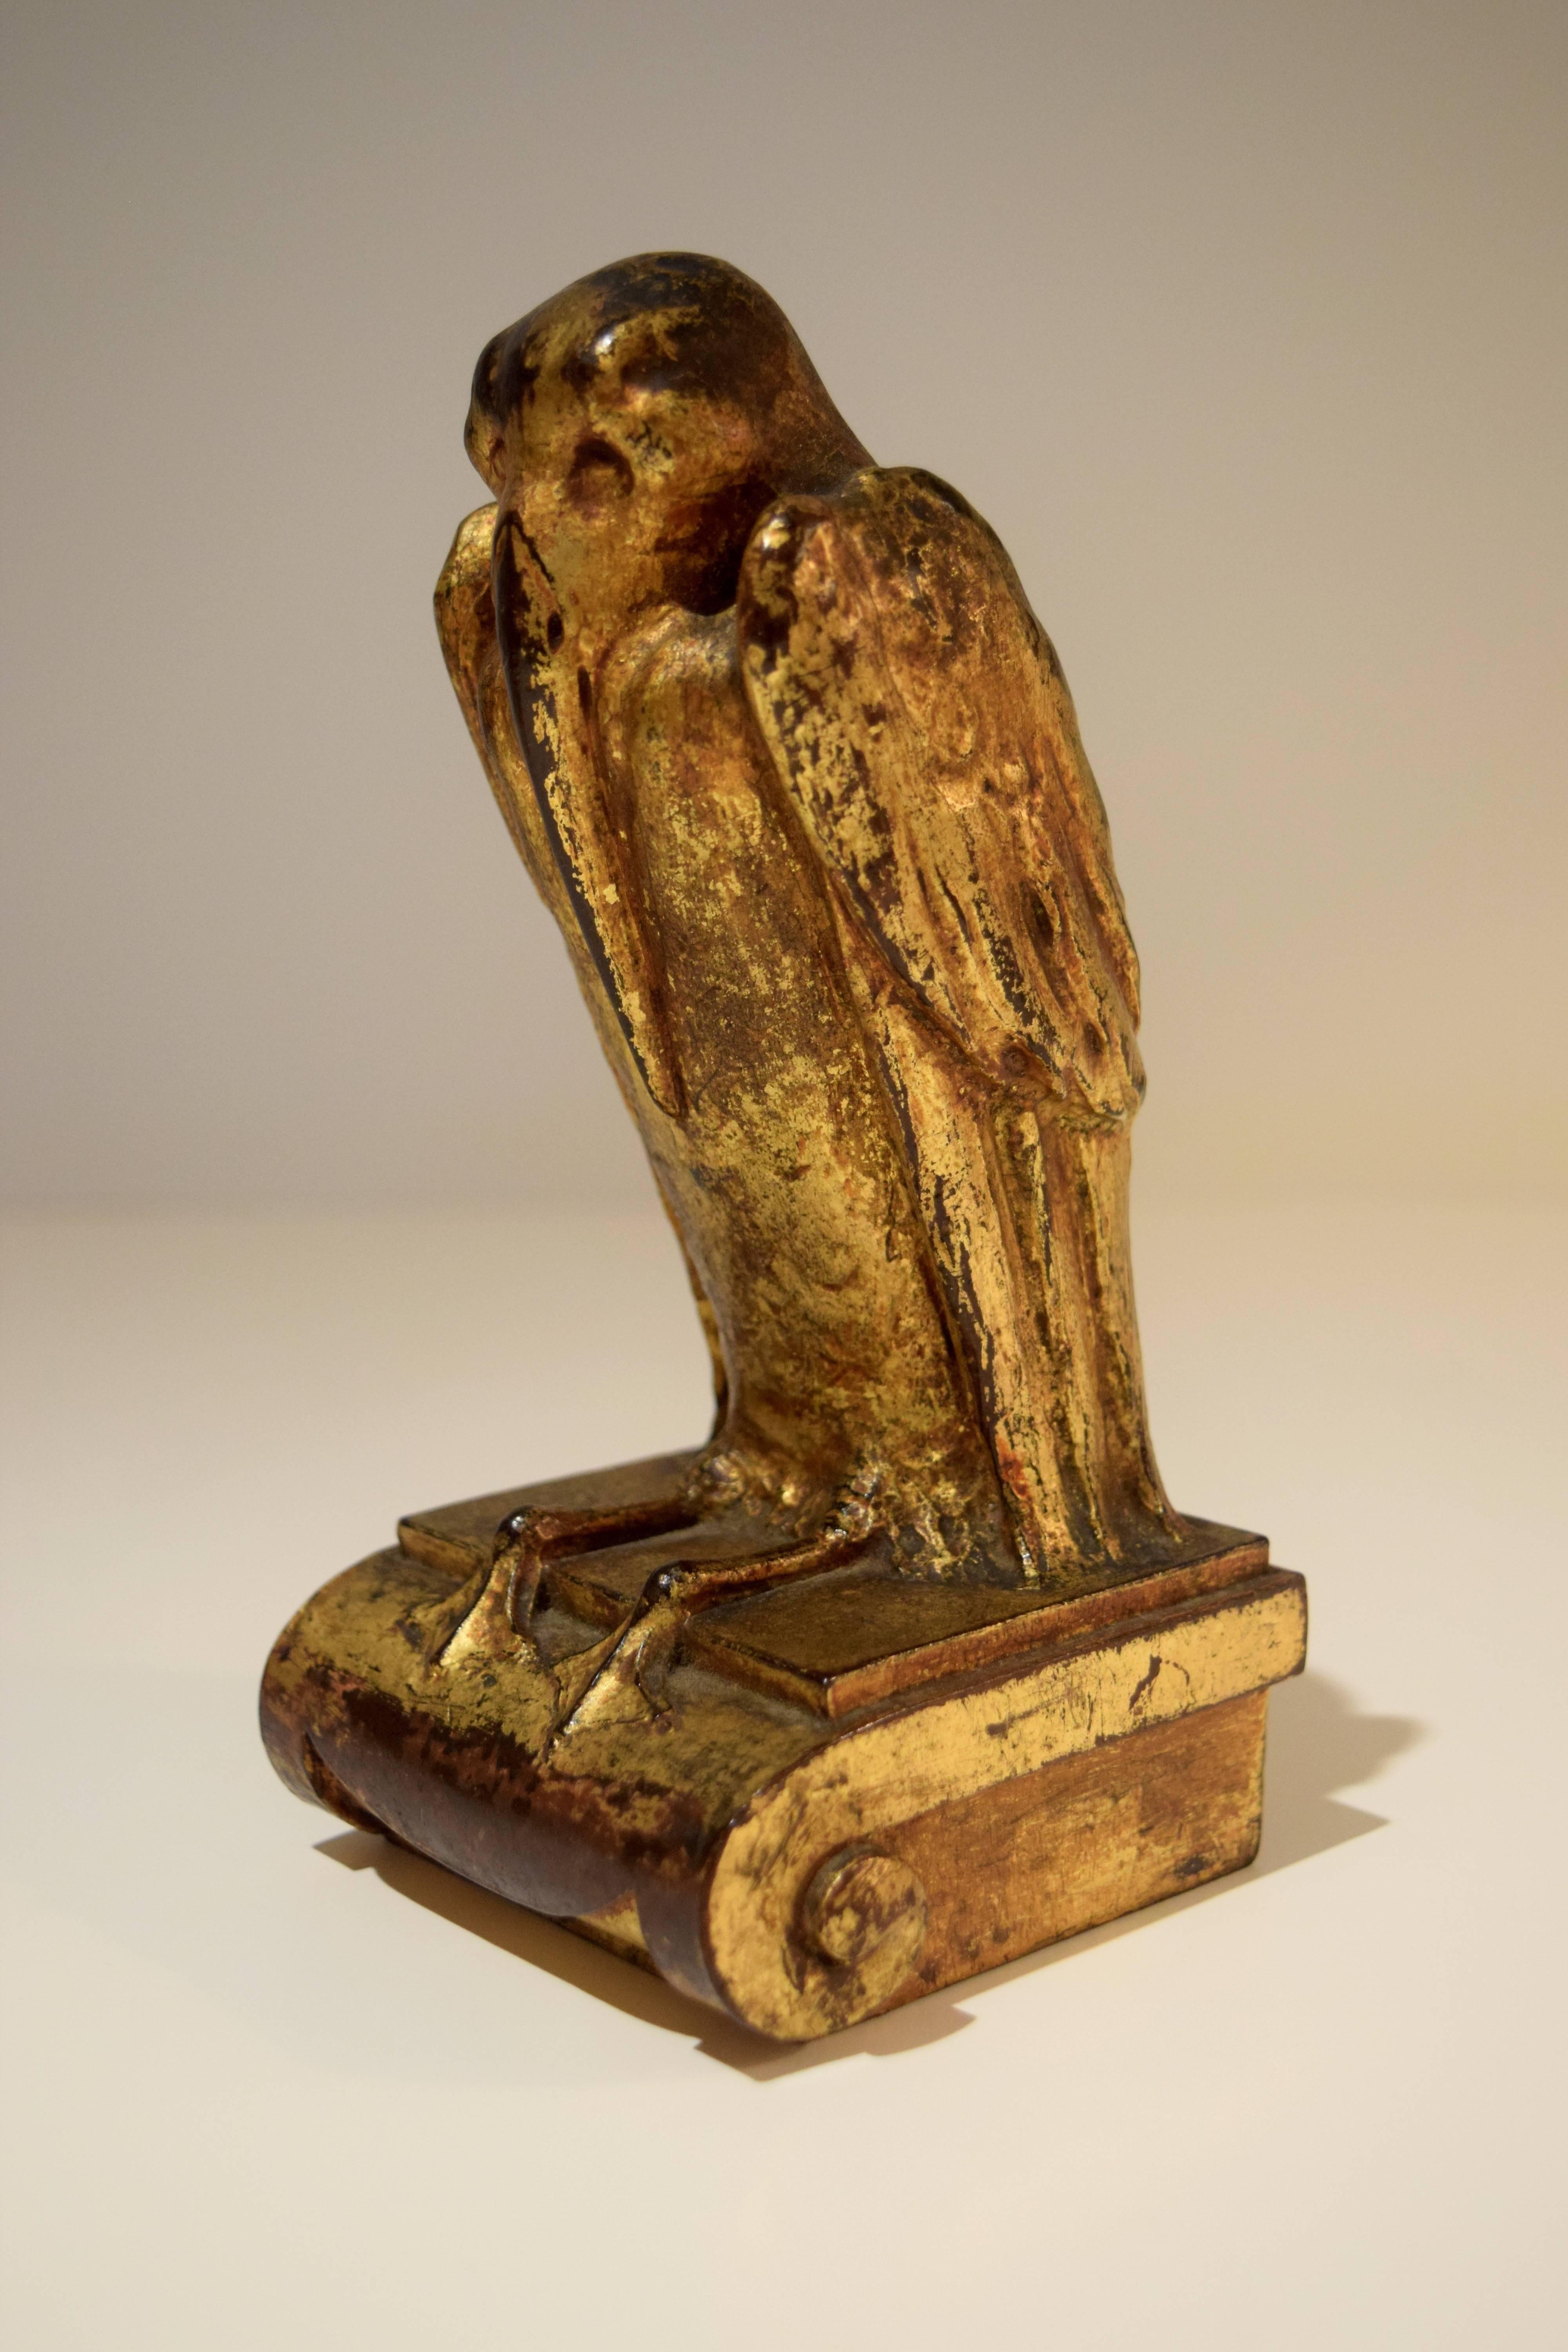 The unknown sculptor of this fine, gilded-mahogany pelican appears to have been influenced by the turn-of-the-century Symbolist movement in Europe. The breast feathers are subtly carved, and the webbed feet cling to an Ionic capital-inspired base.